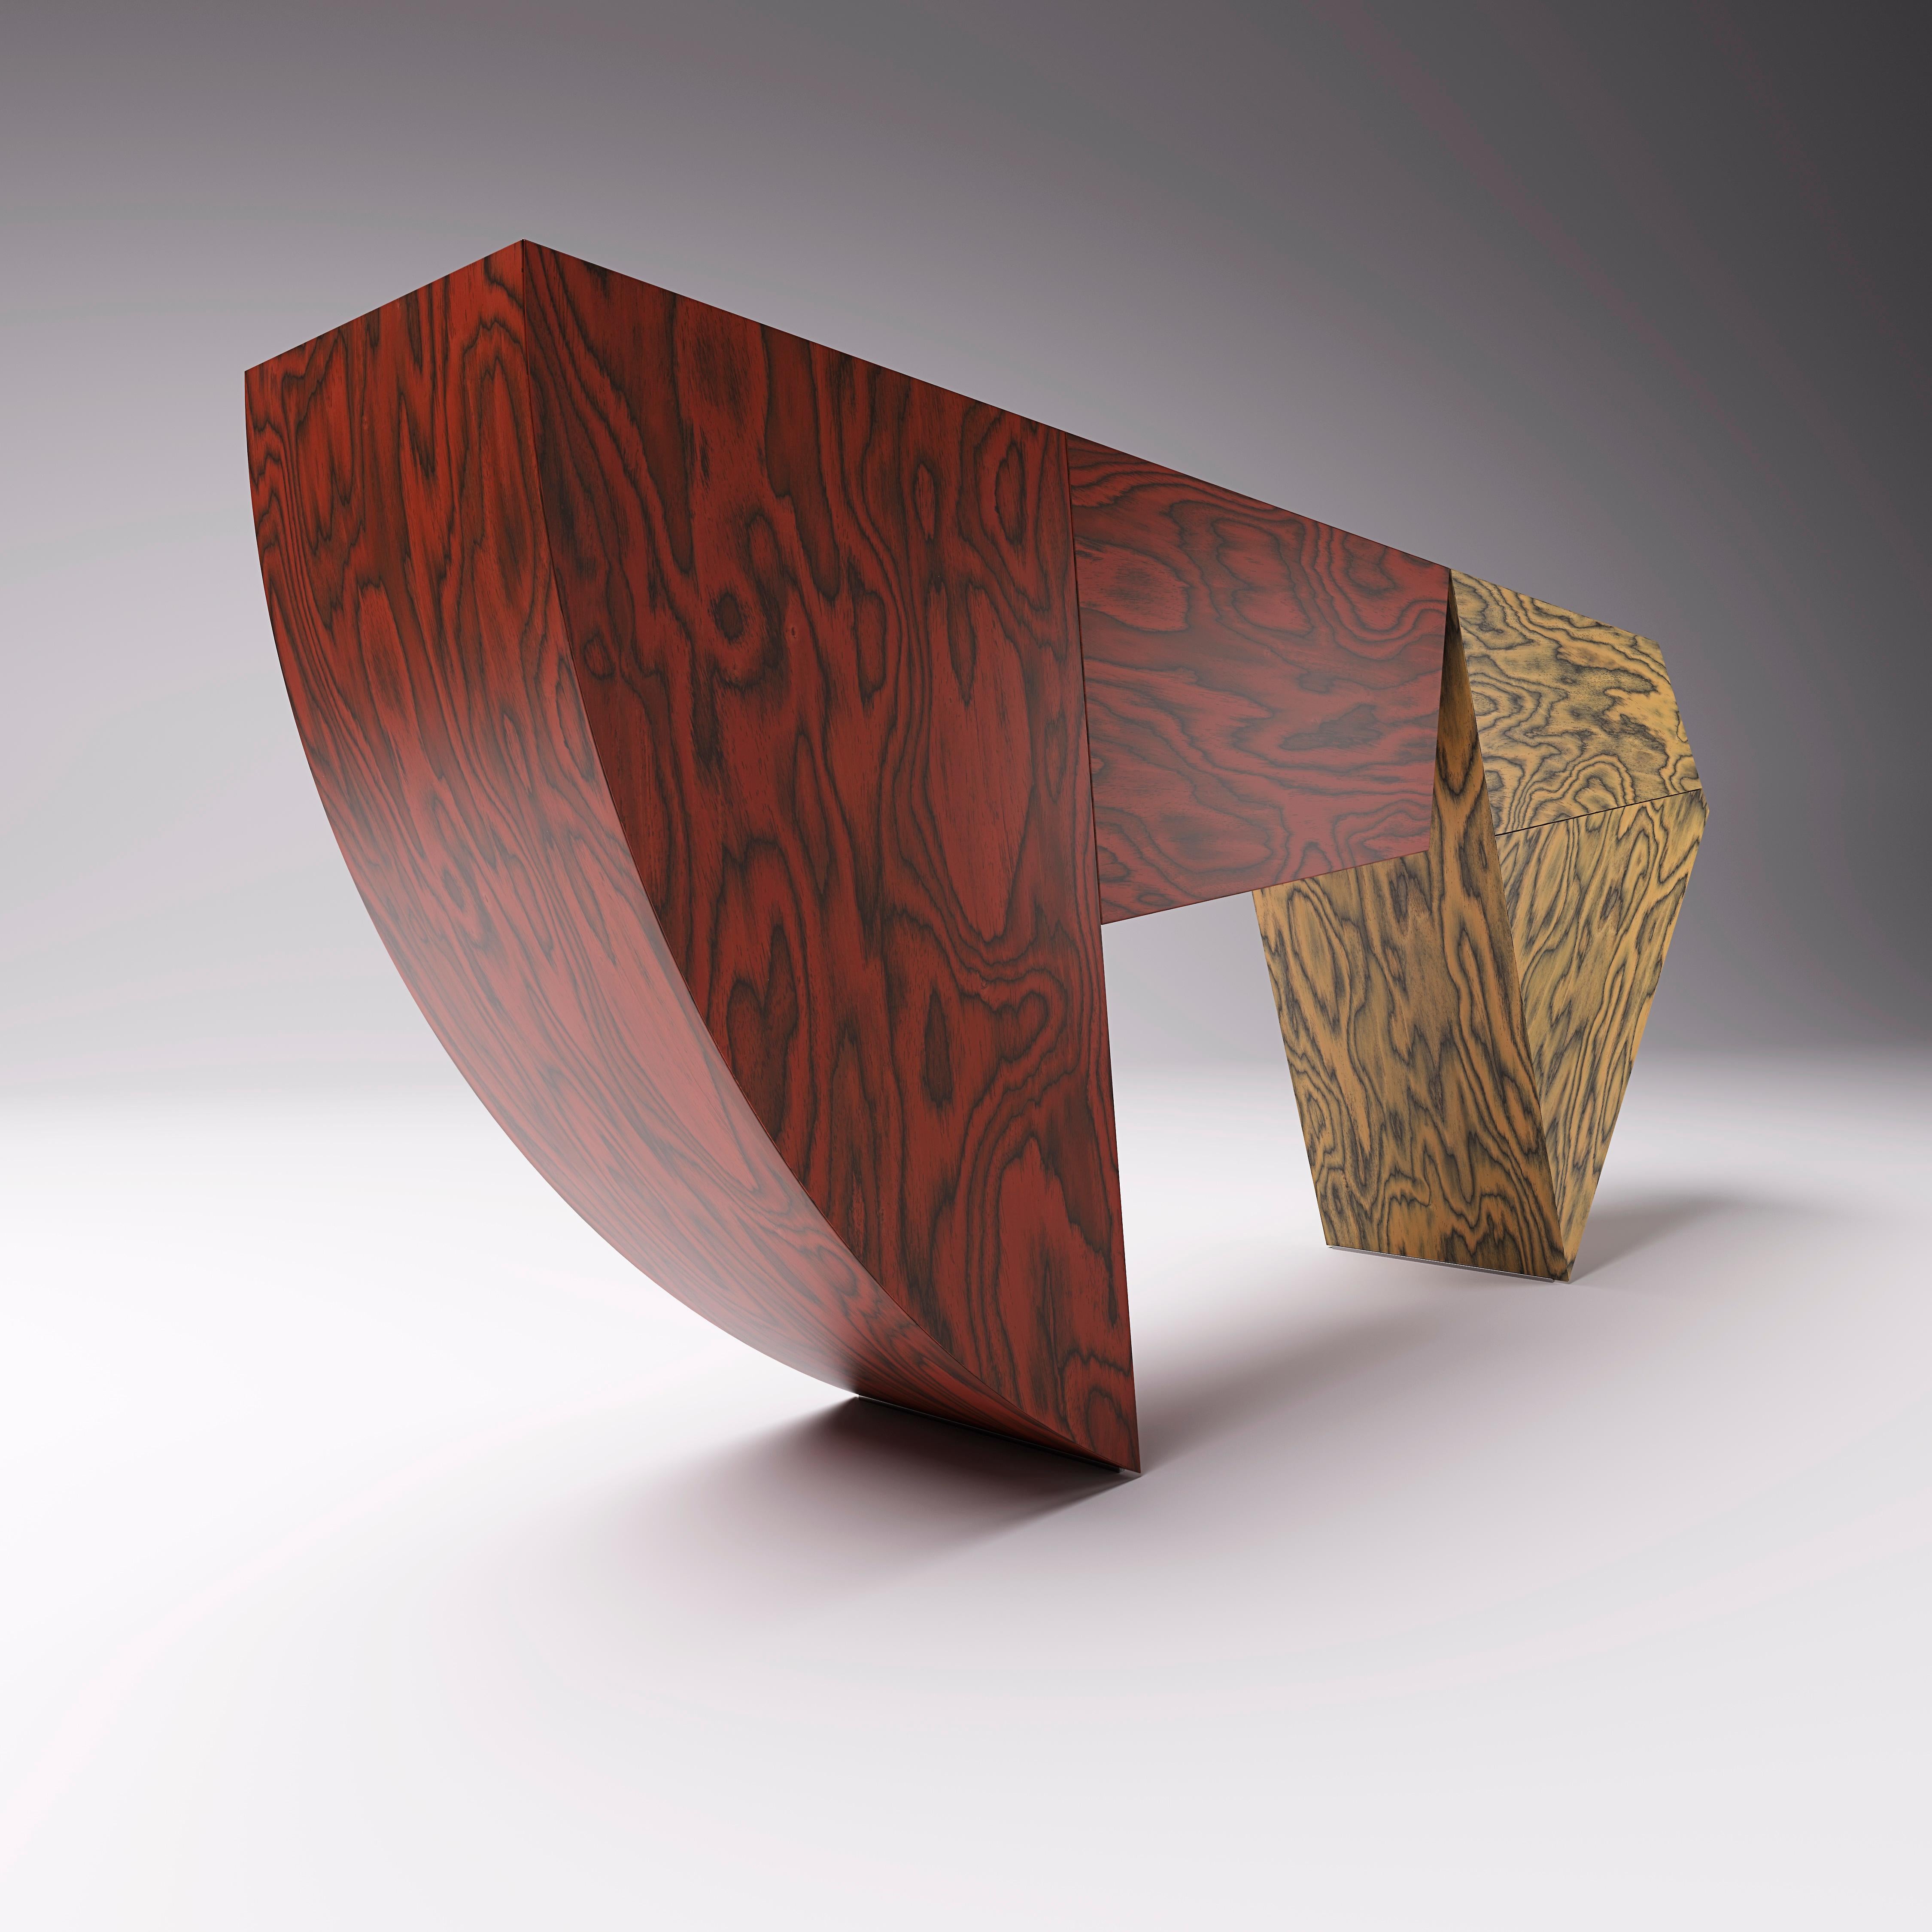 Italian Lola sculptural curved wood sideboard by Sebastiano Bottos For Sale